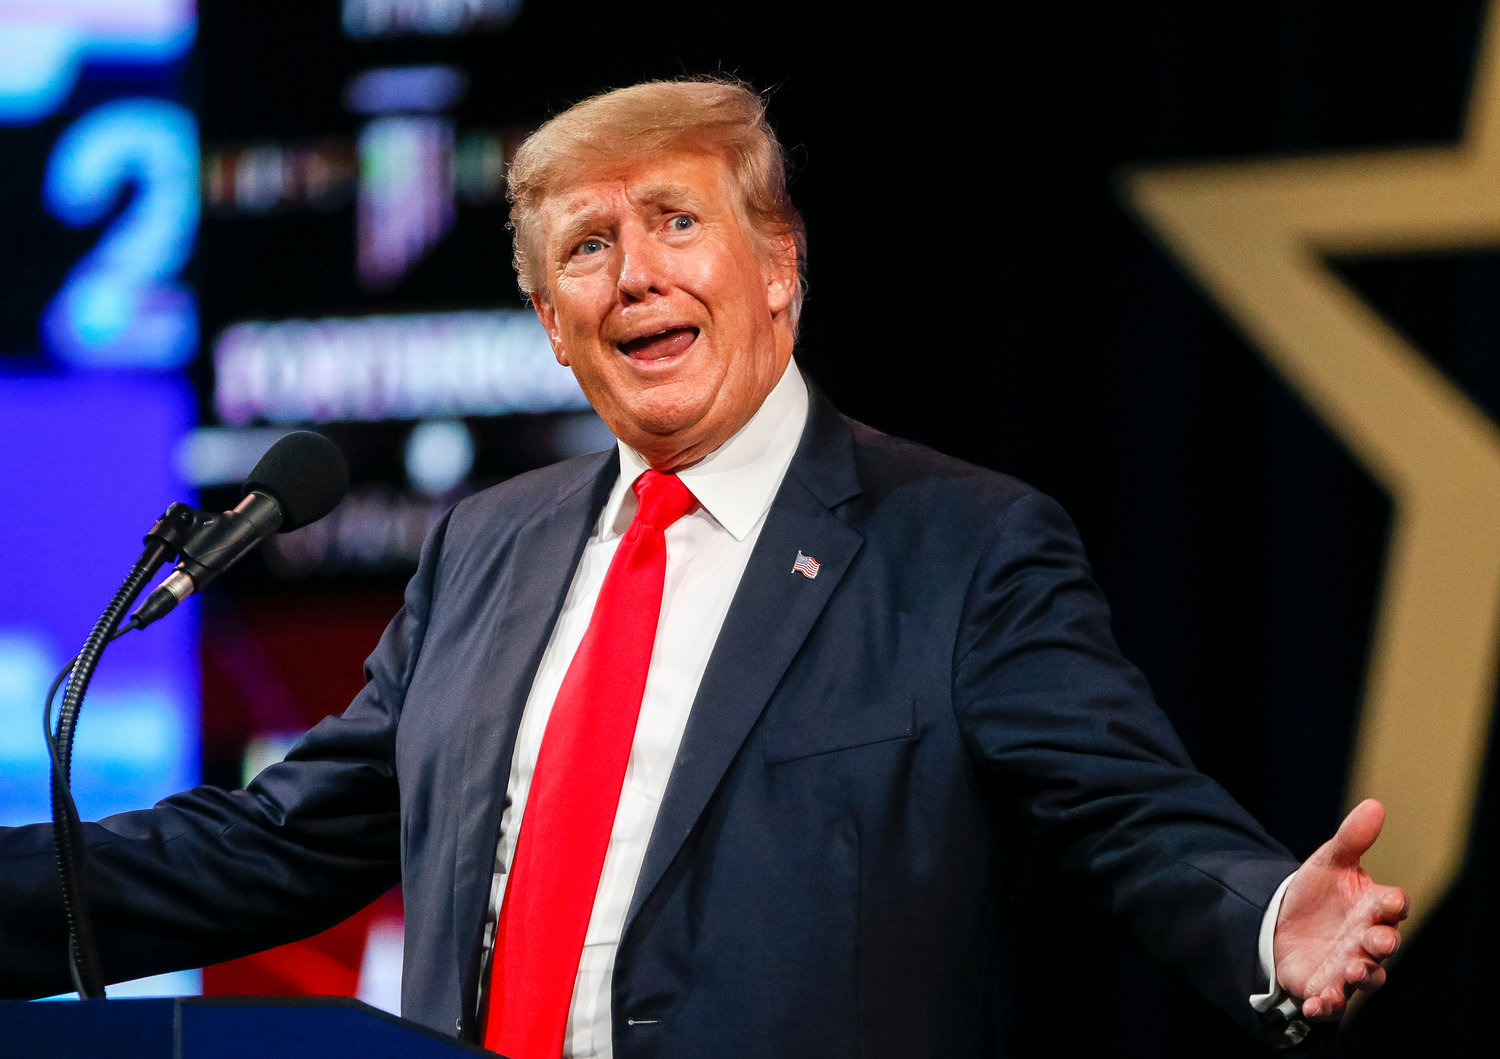 Former president Donald Trump speaks at the Conservative Political Action Conference on July 11, 2021, in Dallas. (Elias Valverde II/Dallas Morning News/TNS)